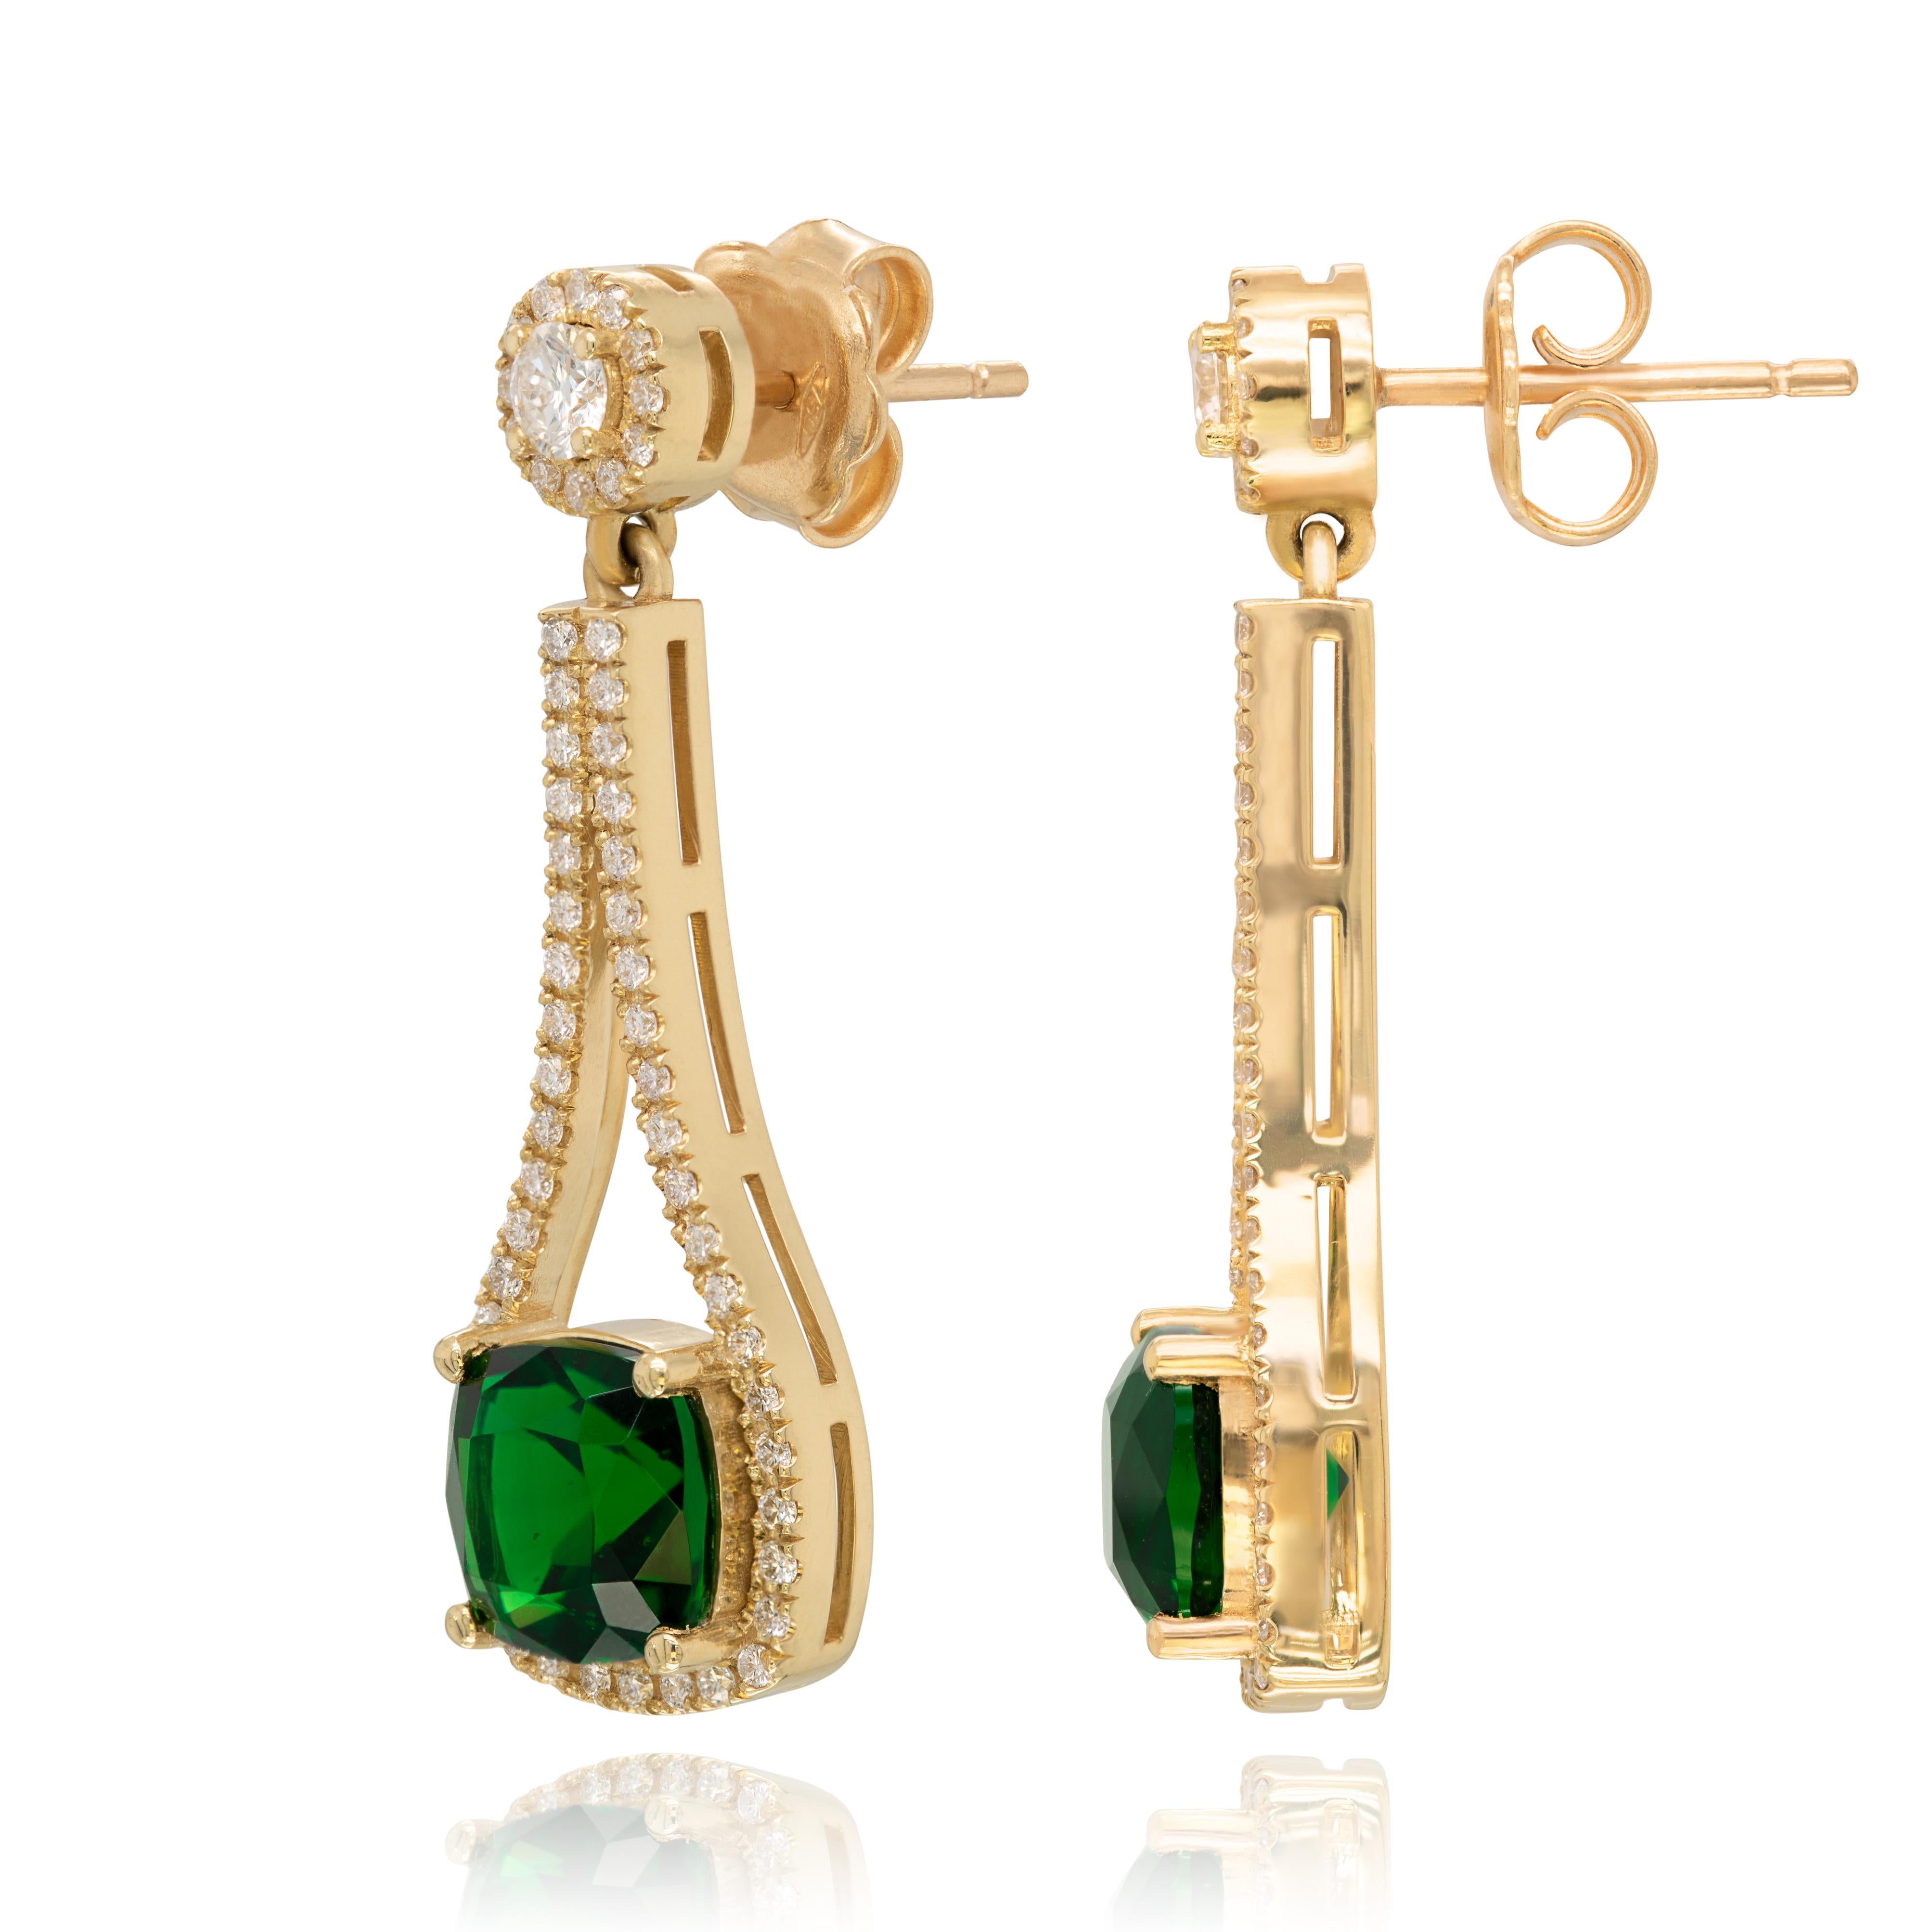 These Chrome Tourmaline earrings are elegantly placed in a beautifully textured yellow gold setting. 4.57 carats rare Chrome Tourmaline Earrings are brilliantly set with 18K Yellow Gold, creating tremendous contrast between the luster of the